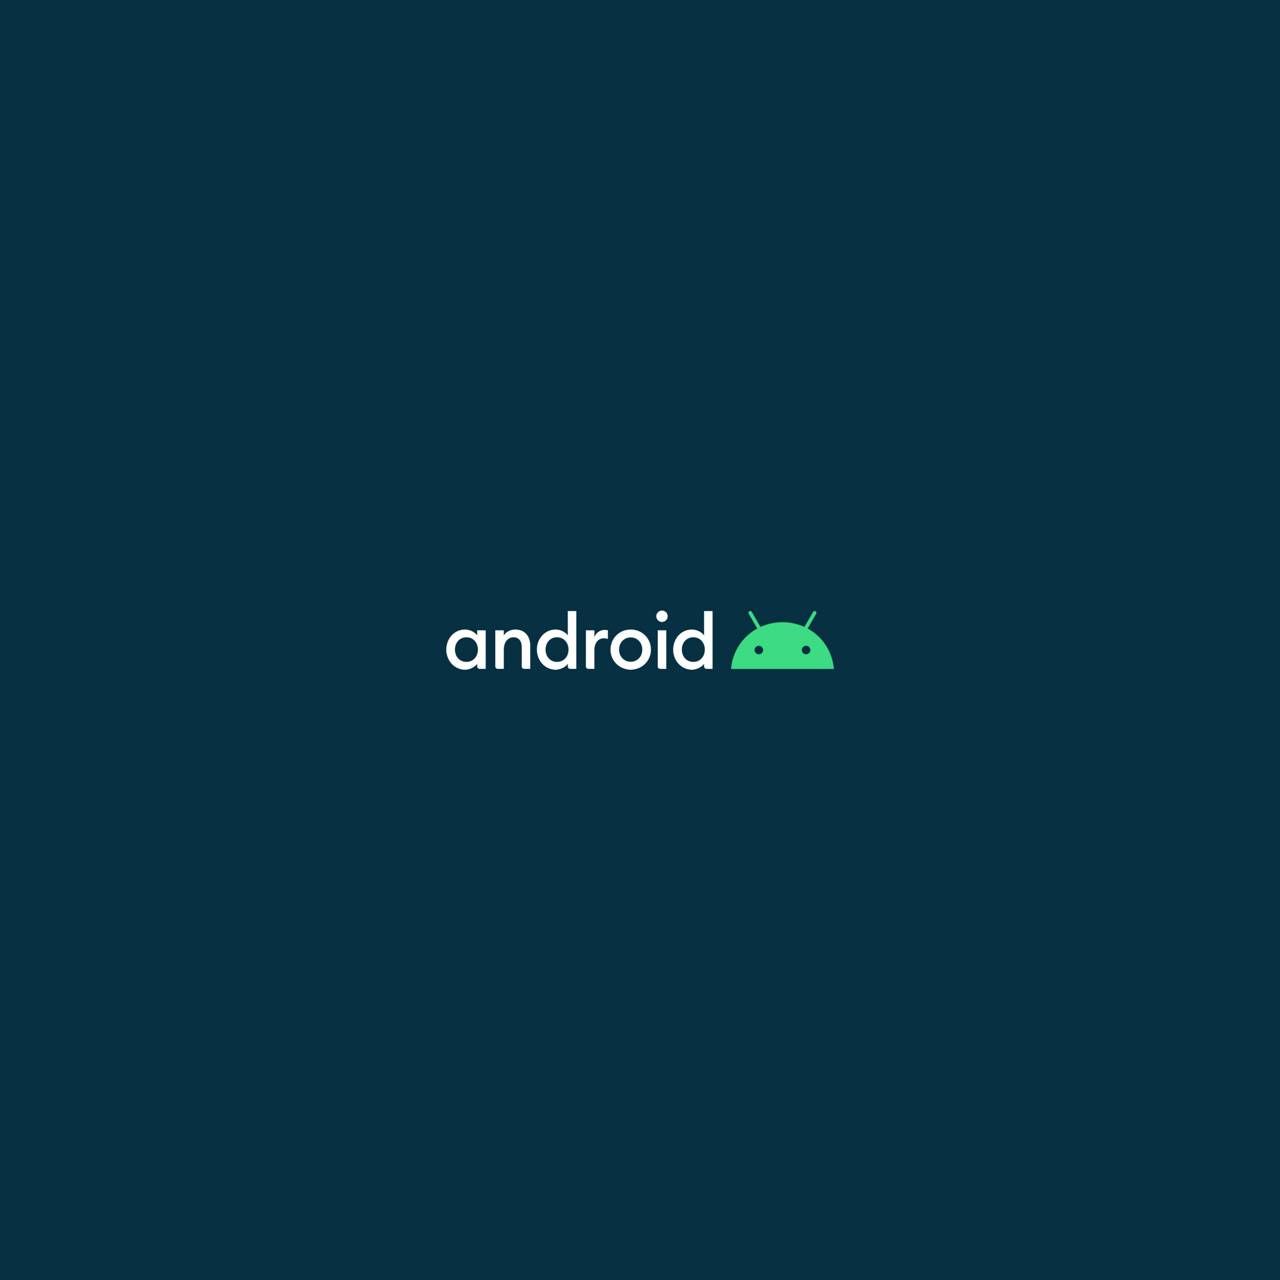 Download android logo wallpaper by mholloway